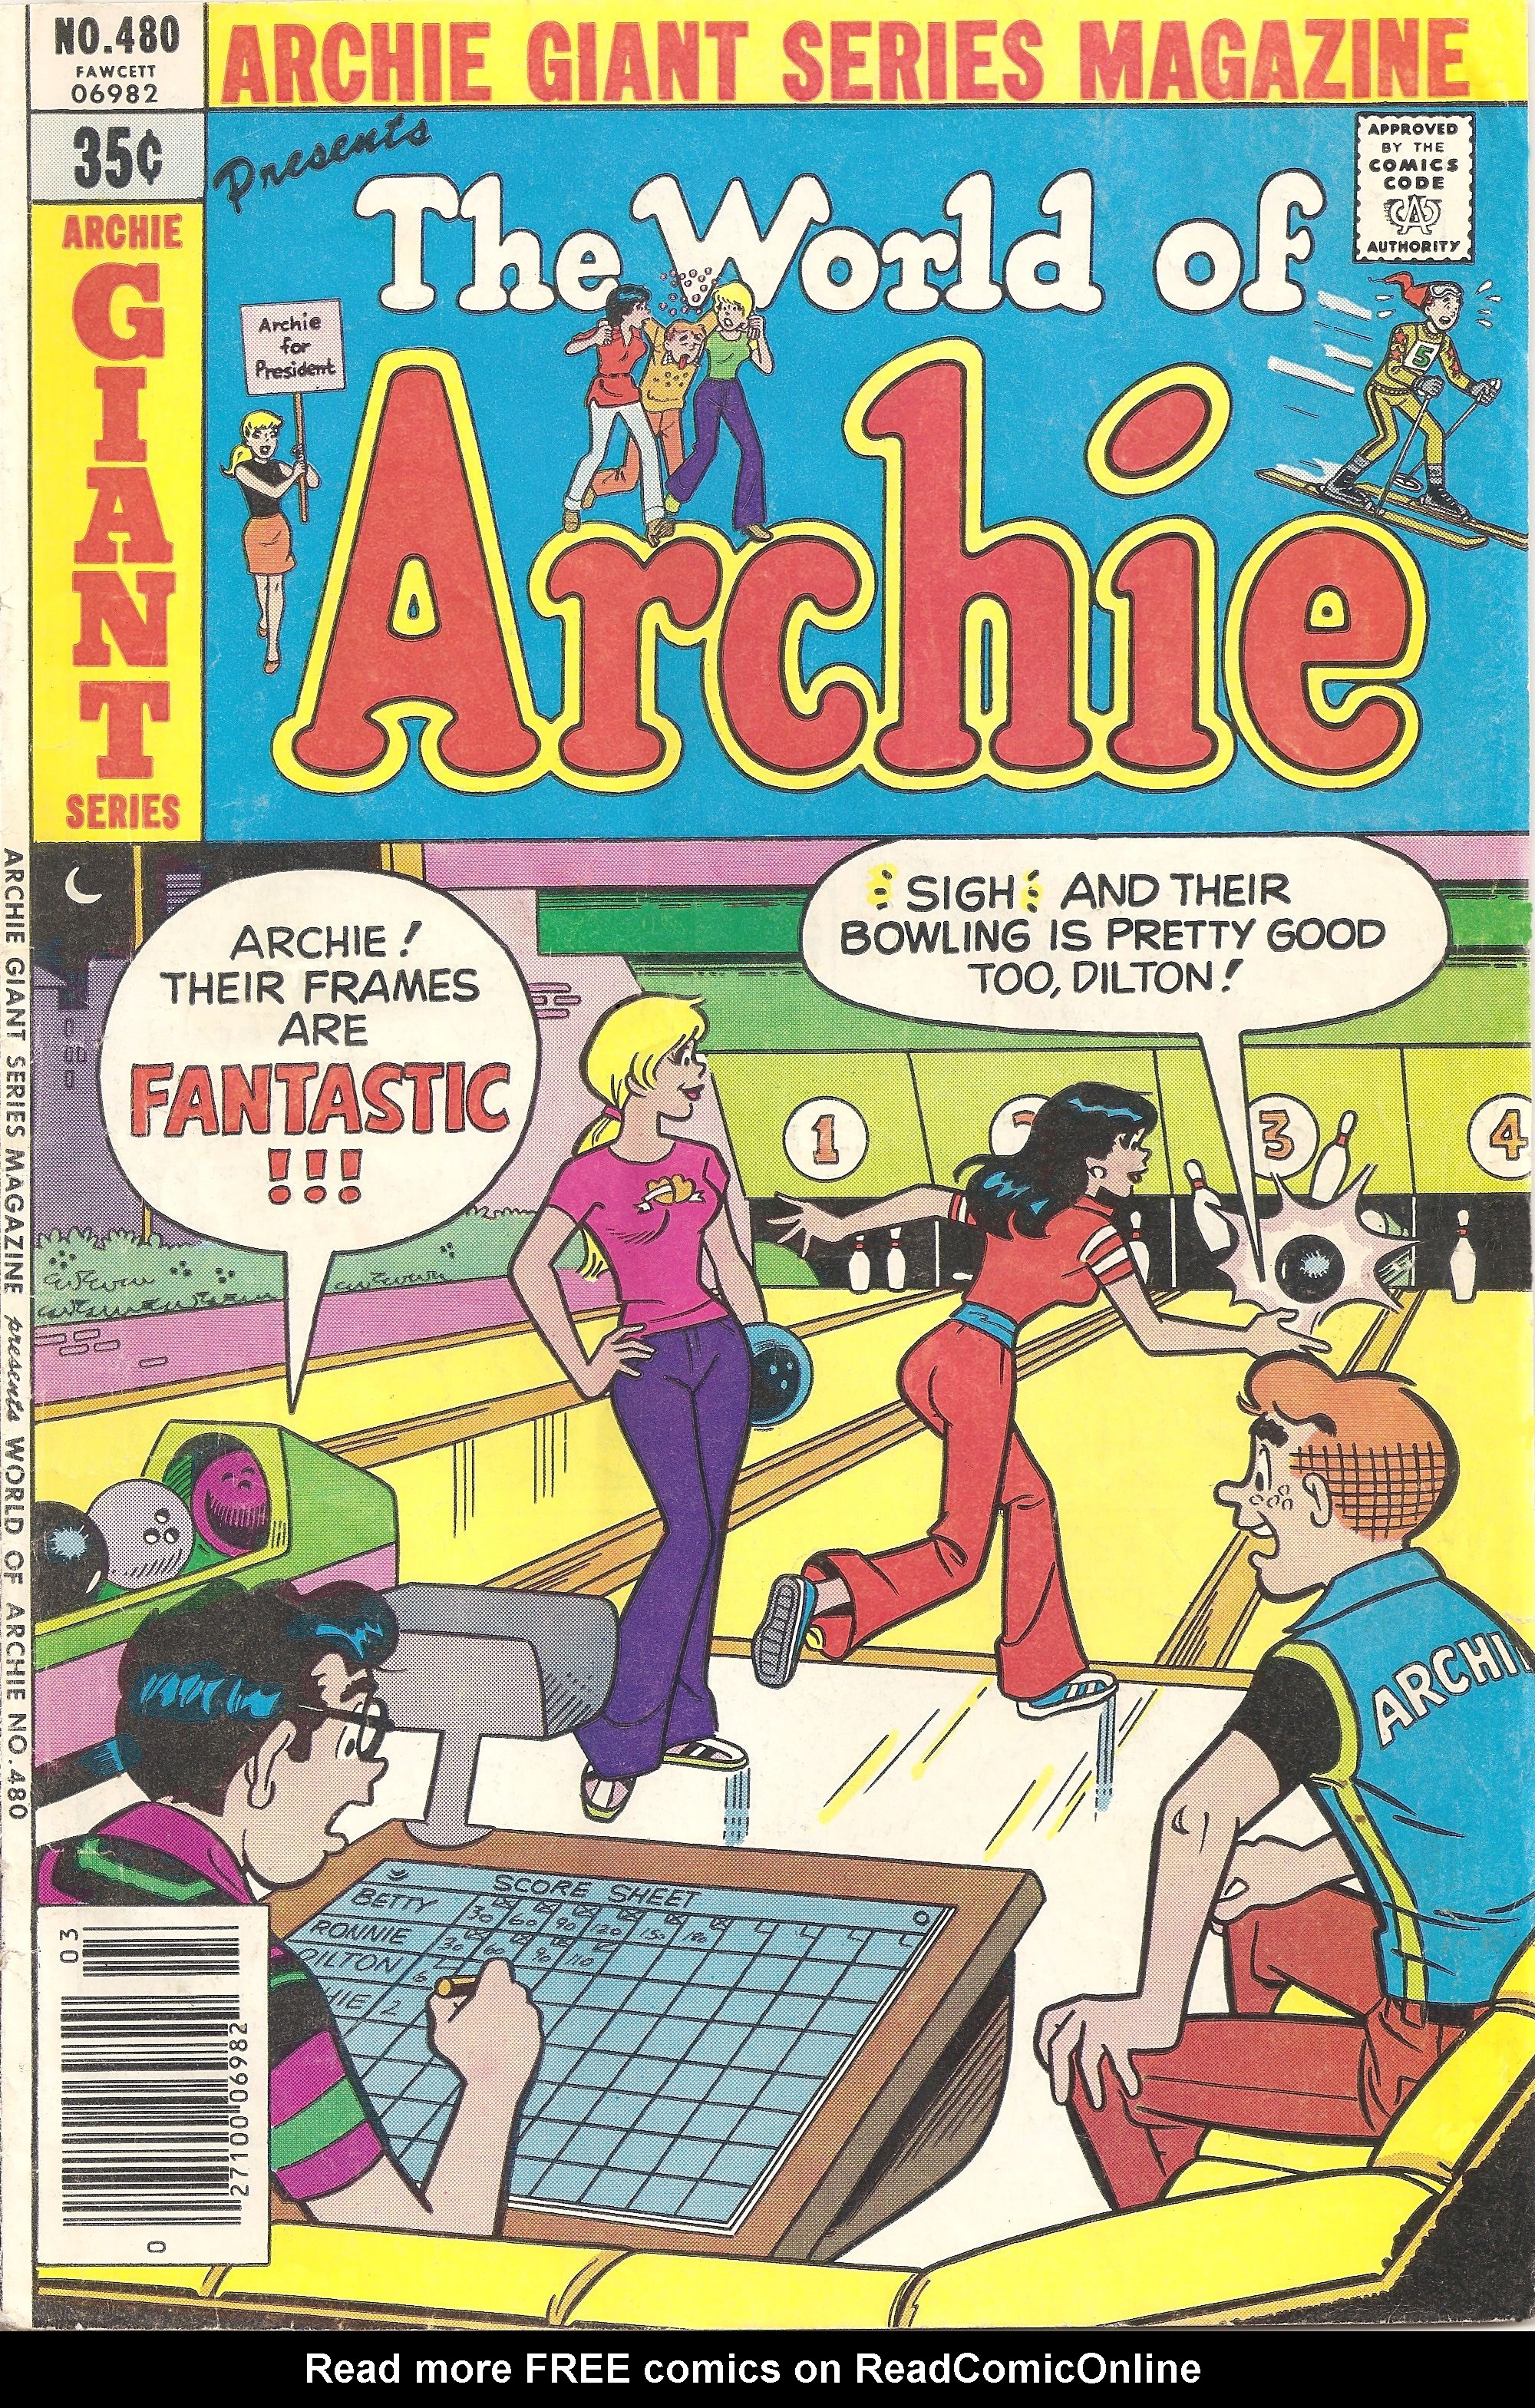 Read online Archie Giant Series Magazine comic -  Issue #480 - 1